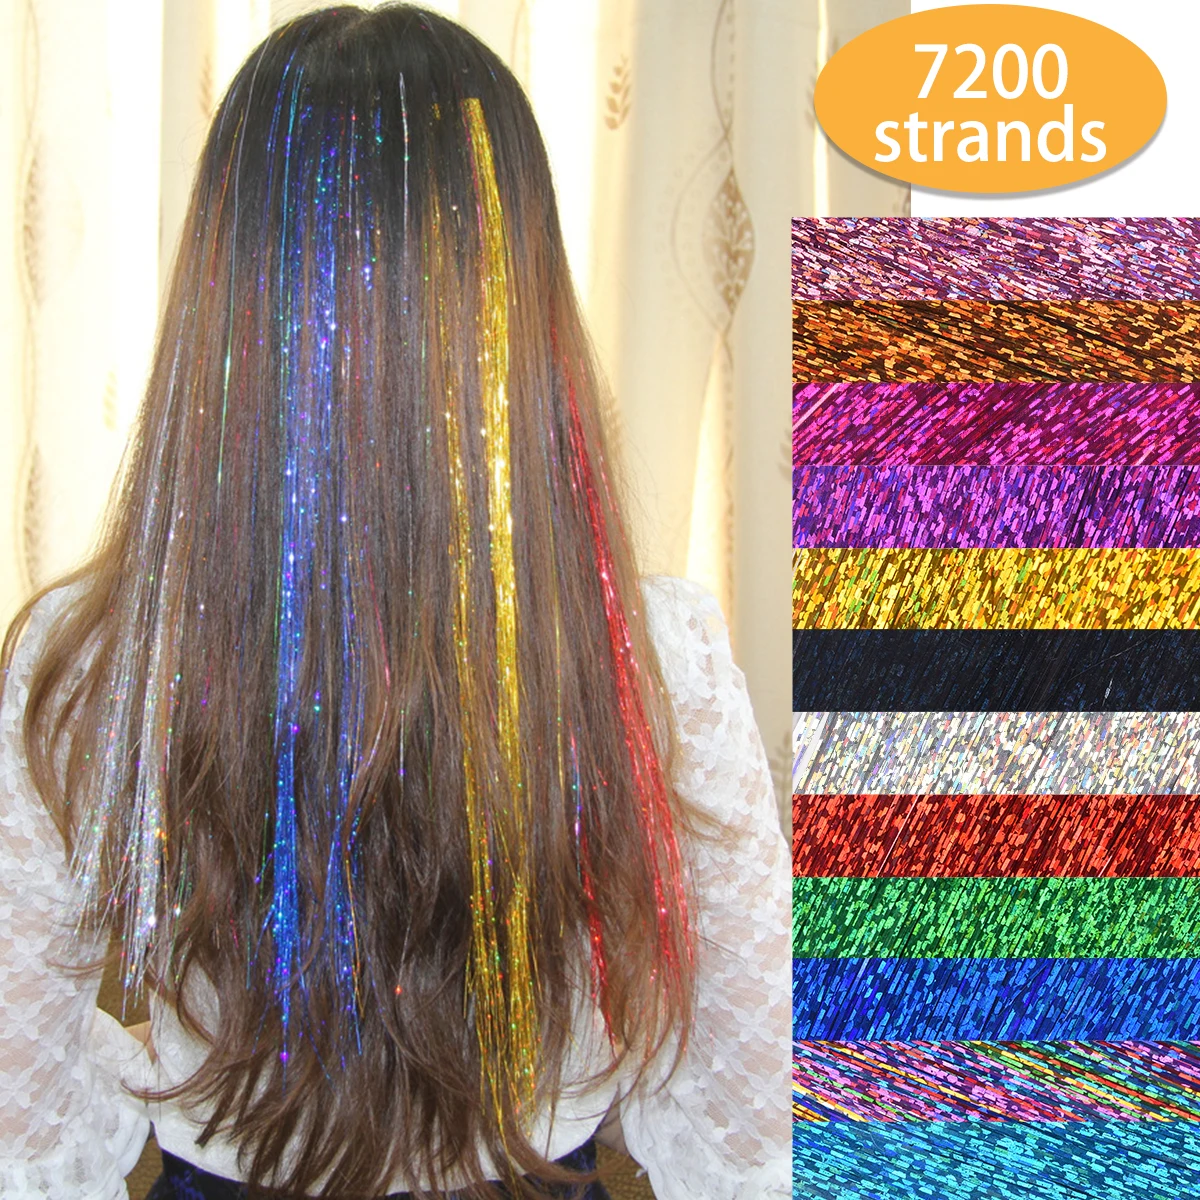 Alileader Fashion Sparkle Silk Tinsel Hair Extensions Glitter Dazzle Colorful For Girls View Tinsel Hair Alileader Product Details From Xuchang Le Yi De Import And Export Trade Co Ltd On Alibaba Com